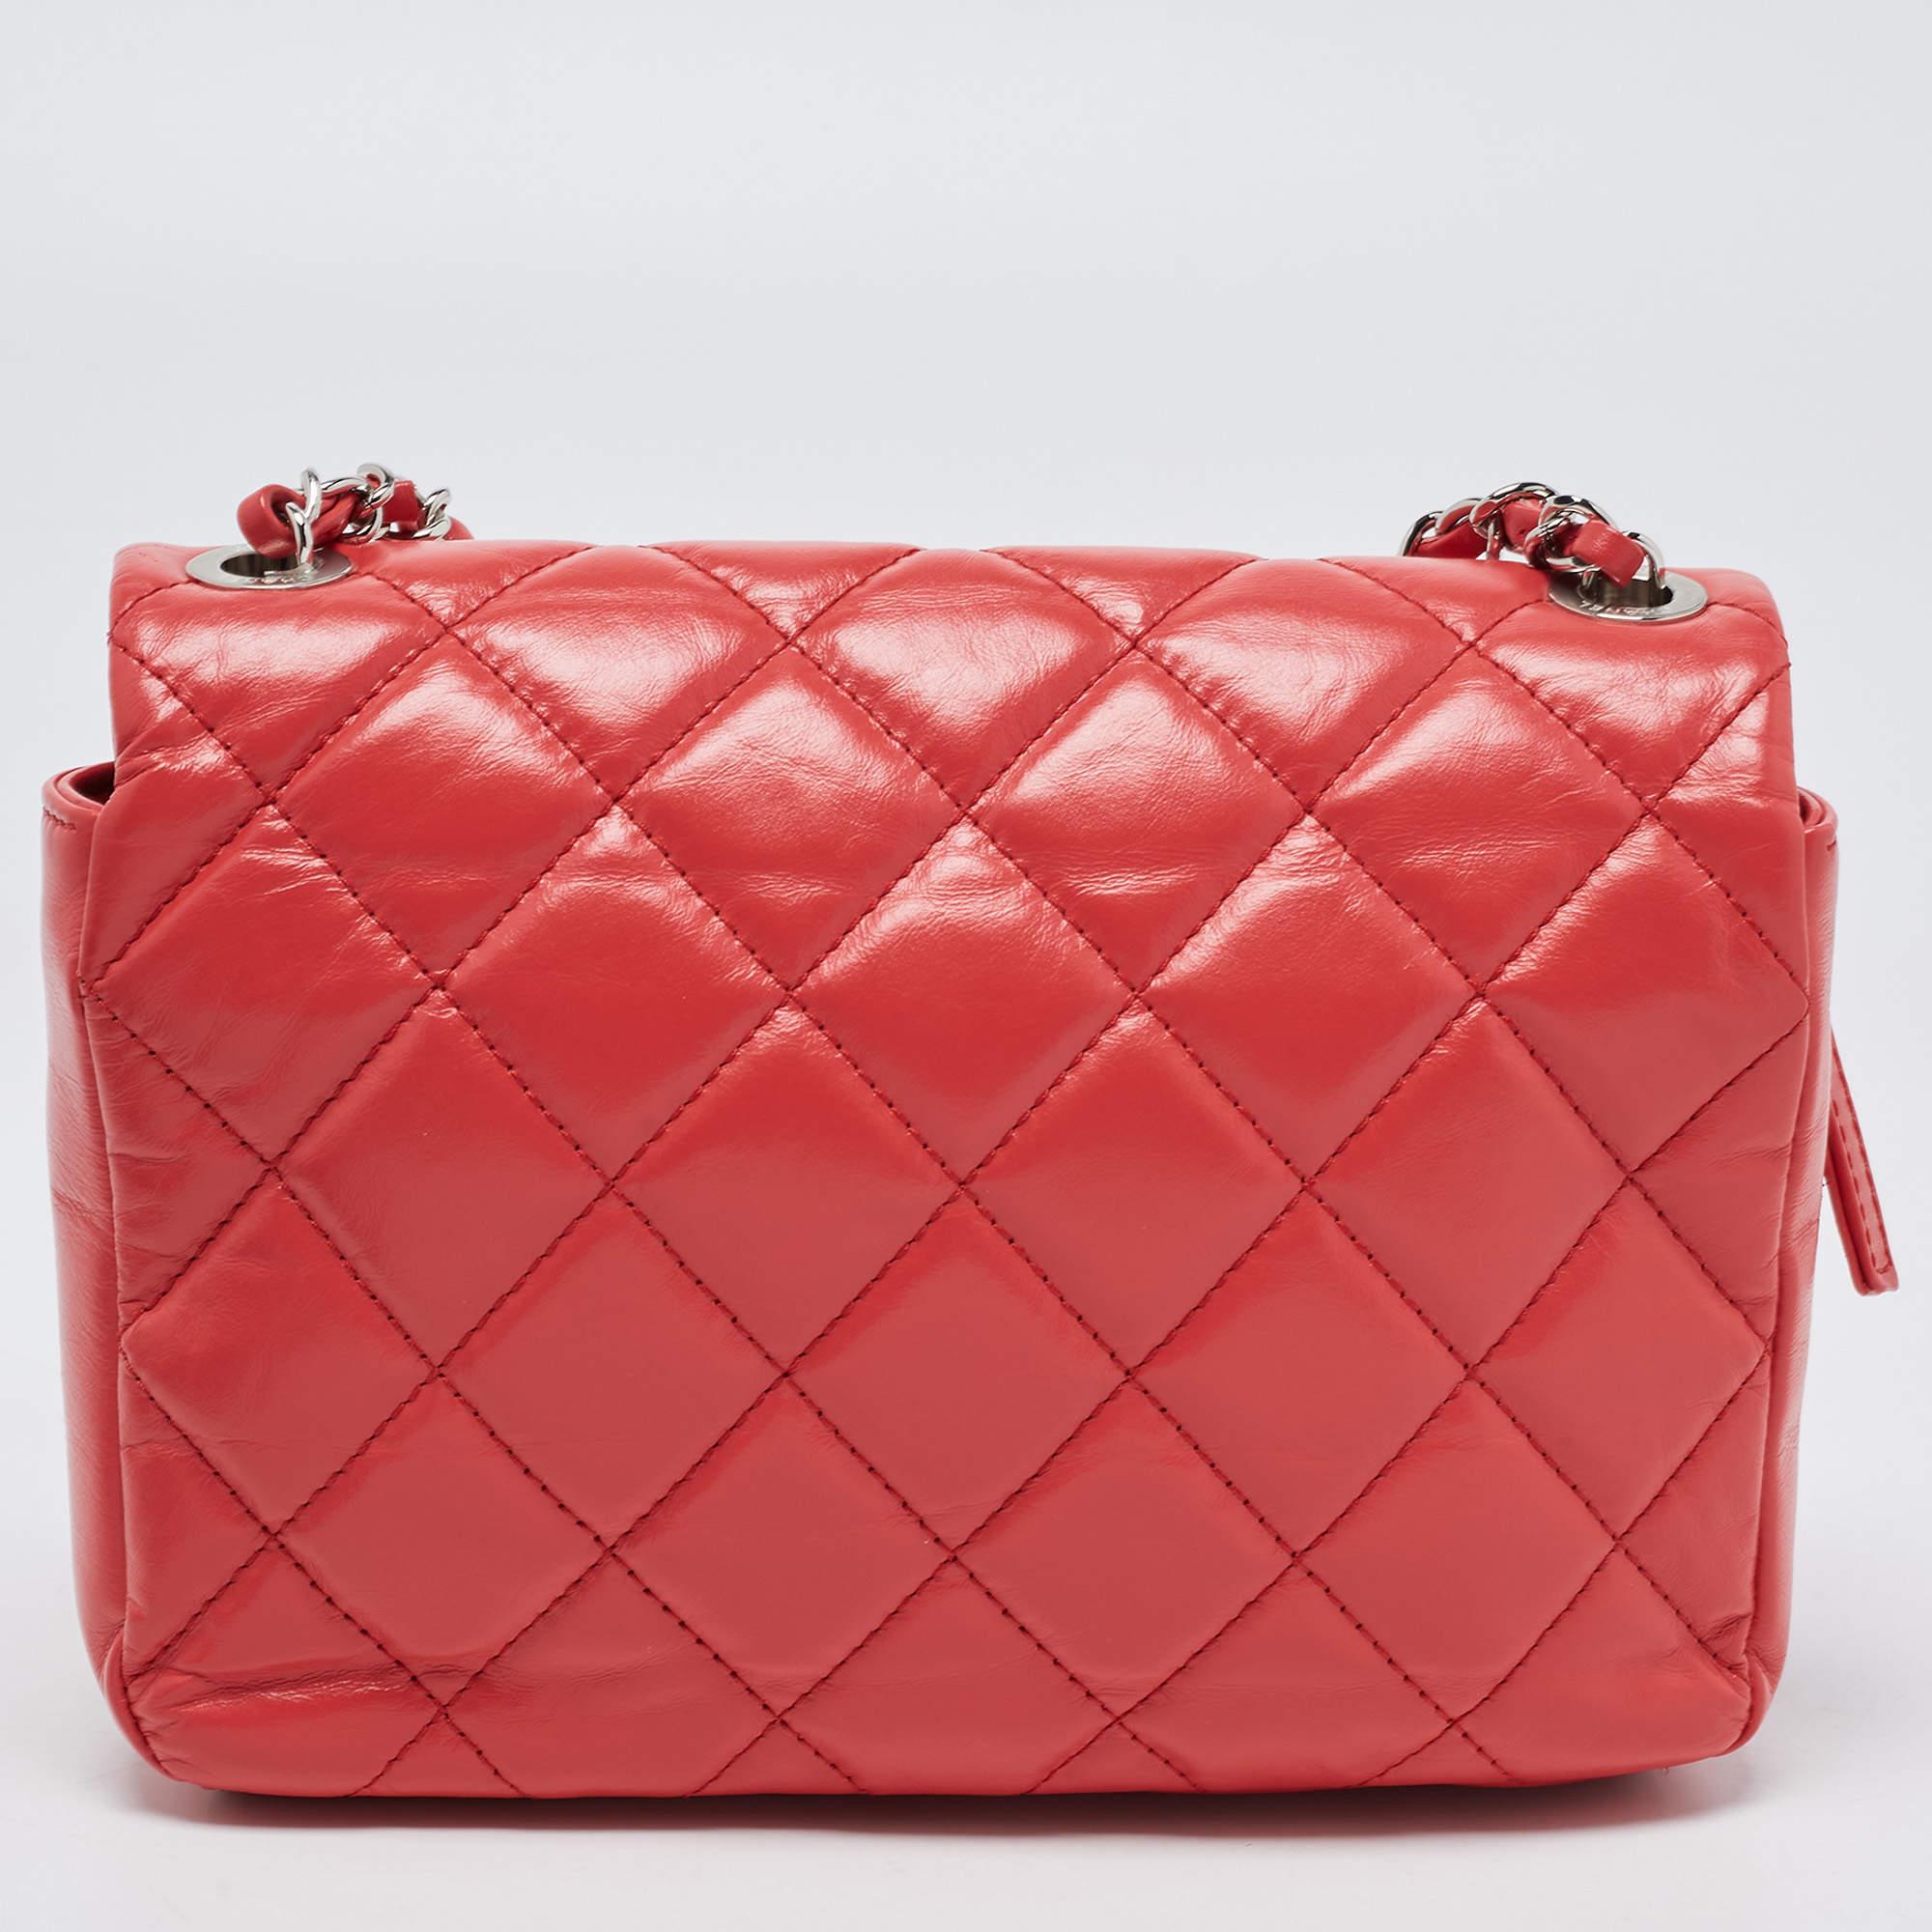 Chanel Pink Coral Quilted Leather Express Zip Around Flap Bag 3